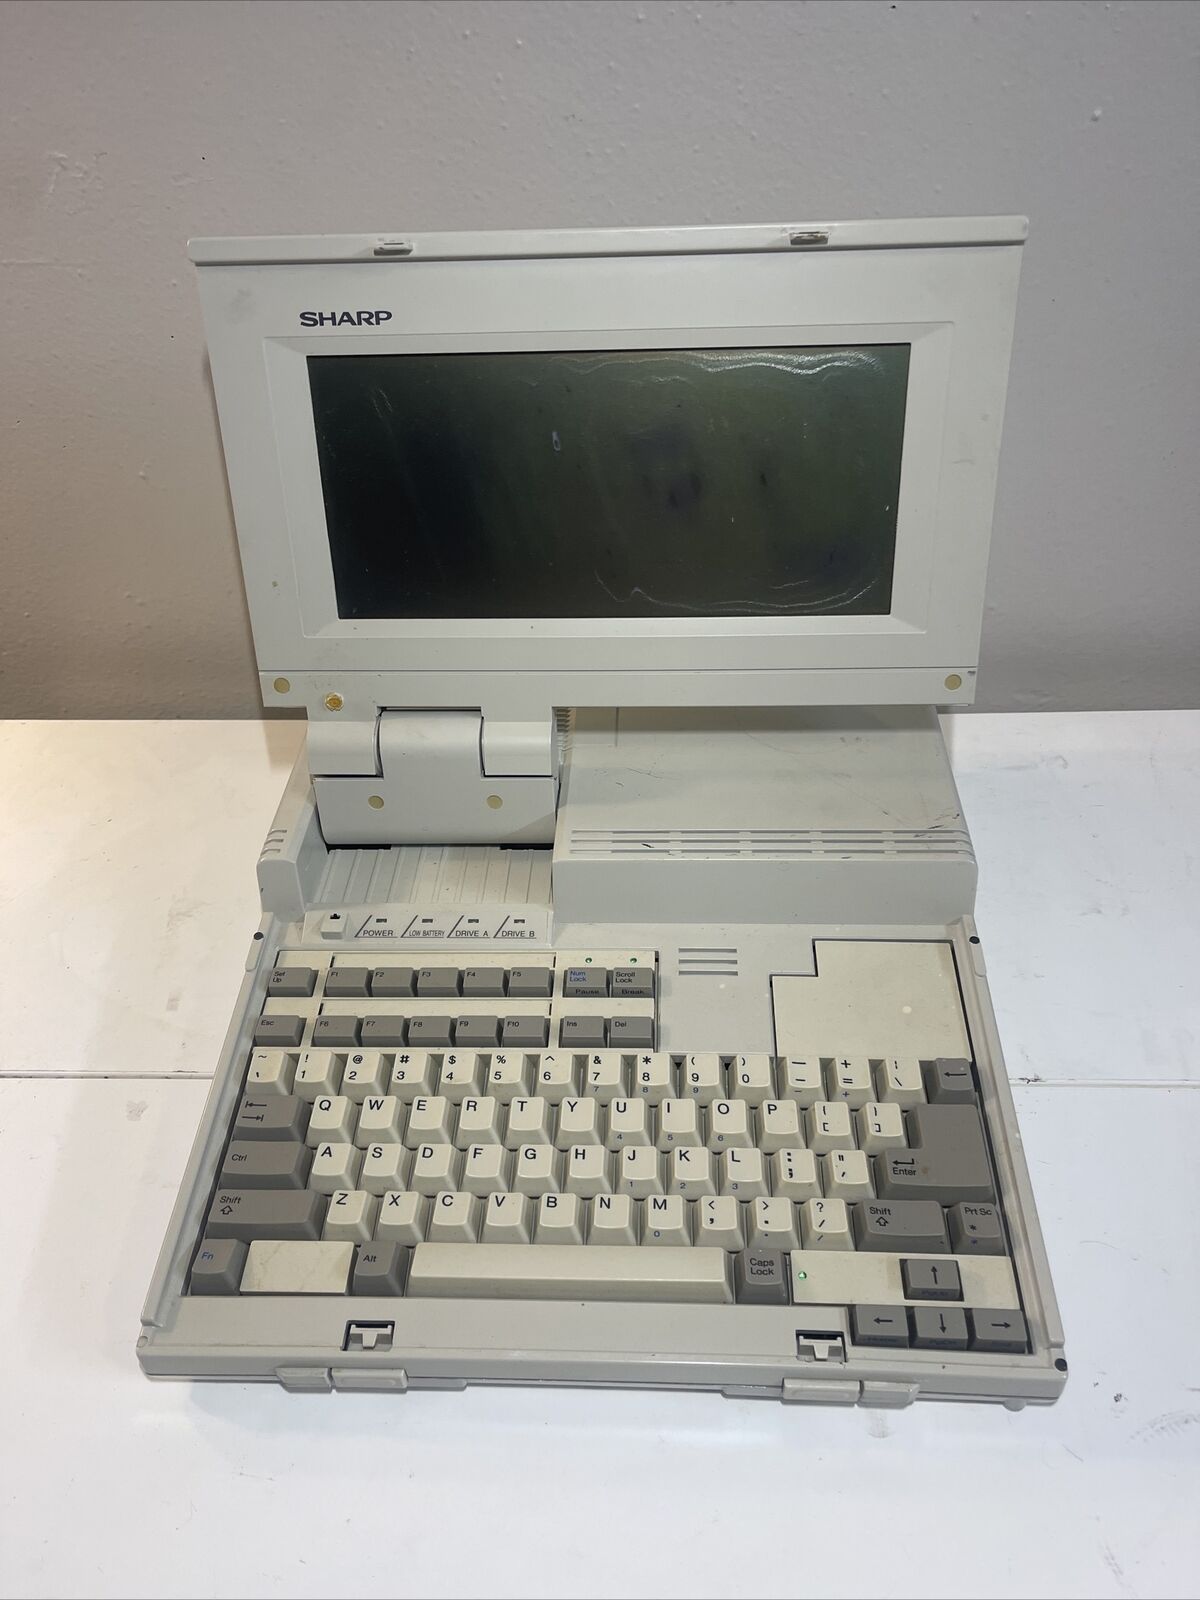 Sharp PC-4501 Vintage Laptop Computer 1988 UNTESTED AS IS